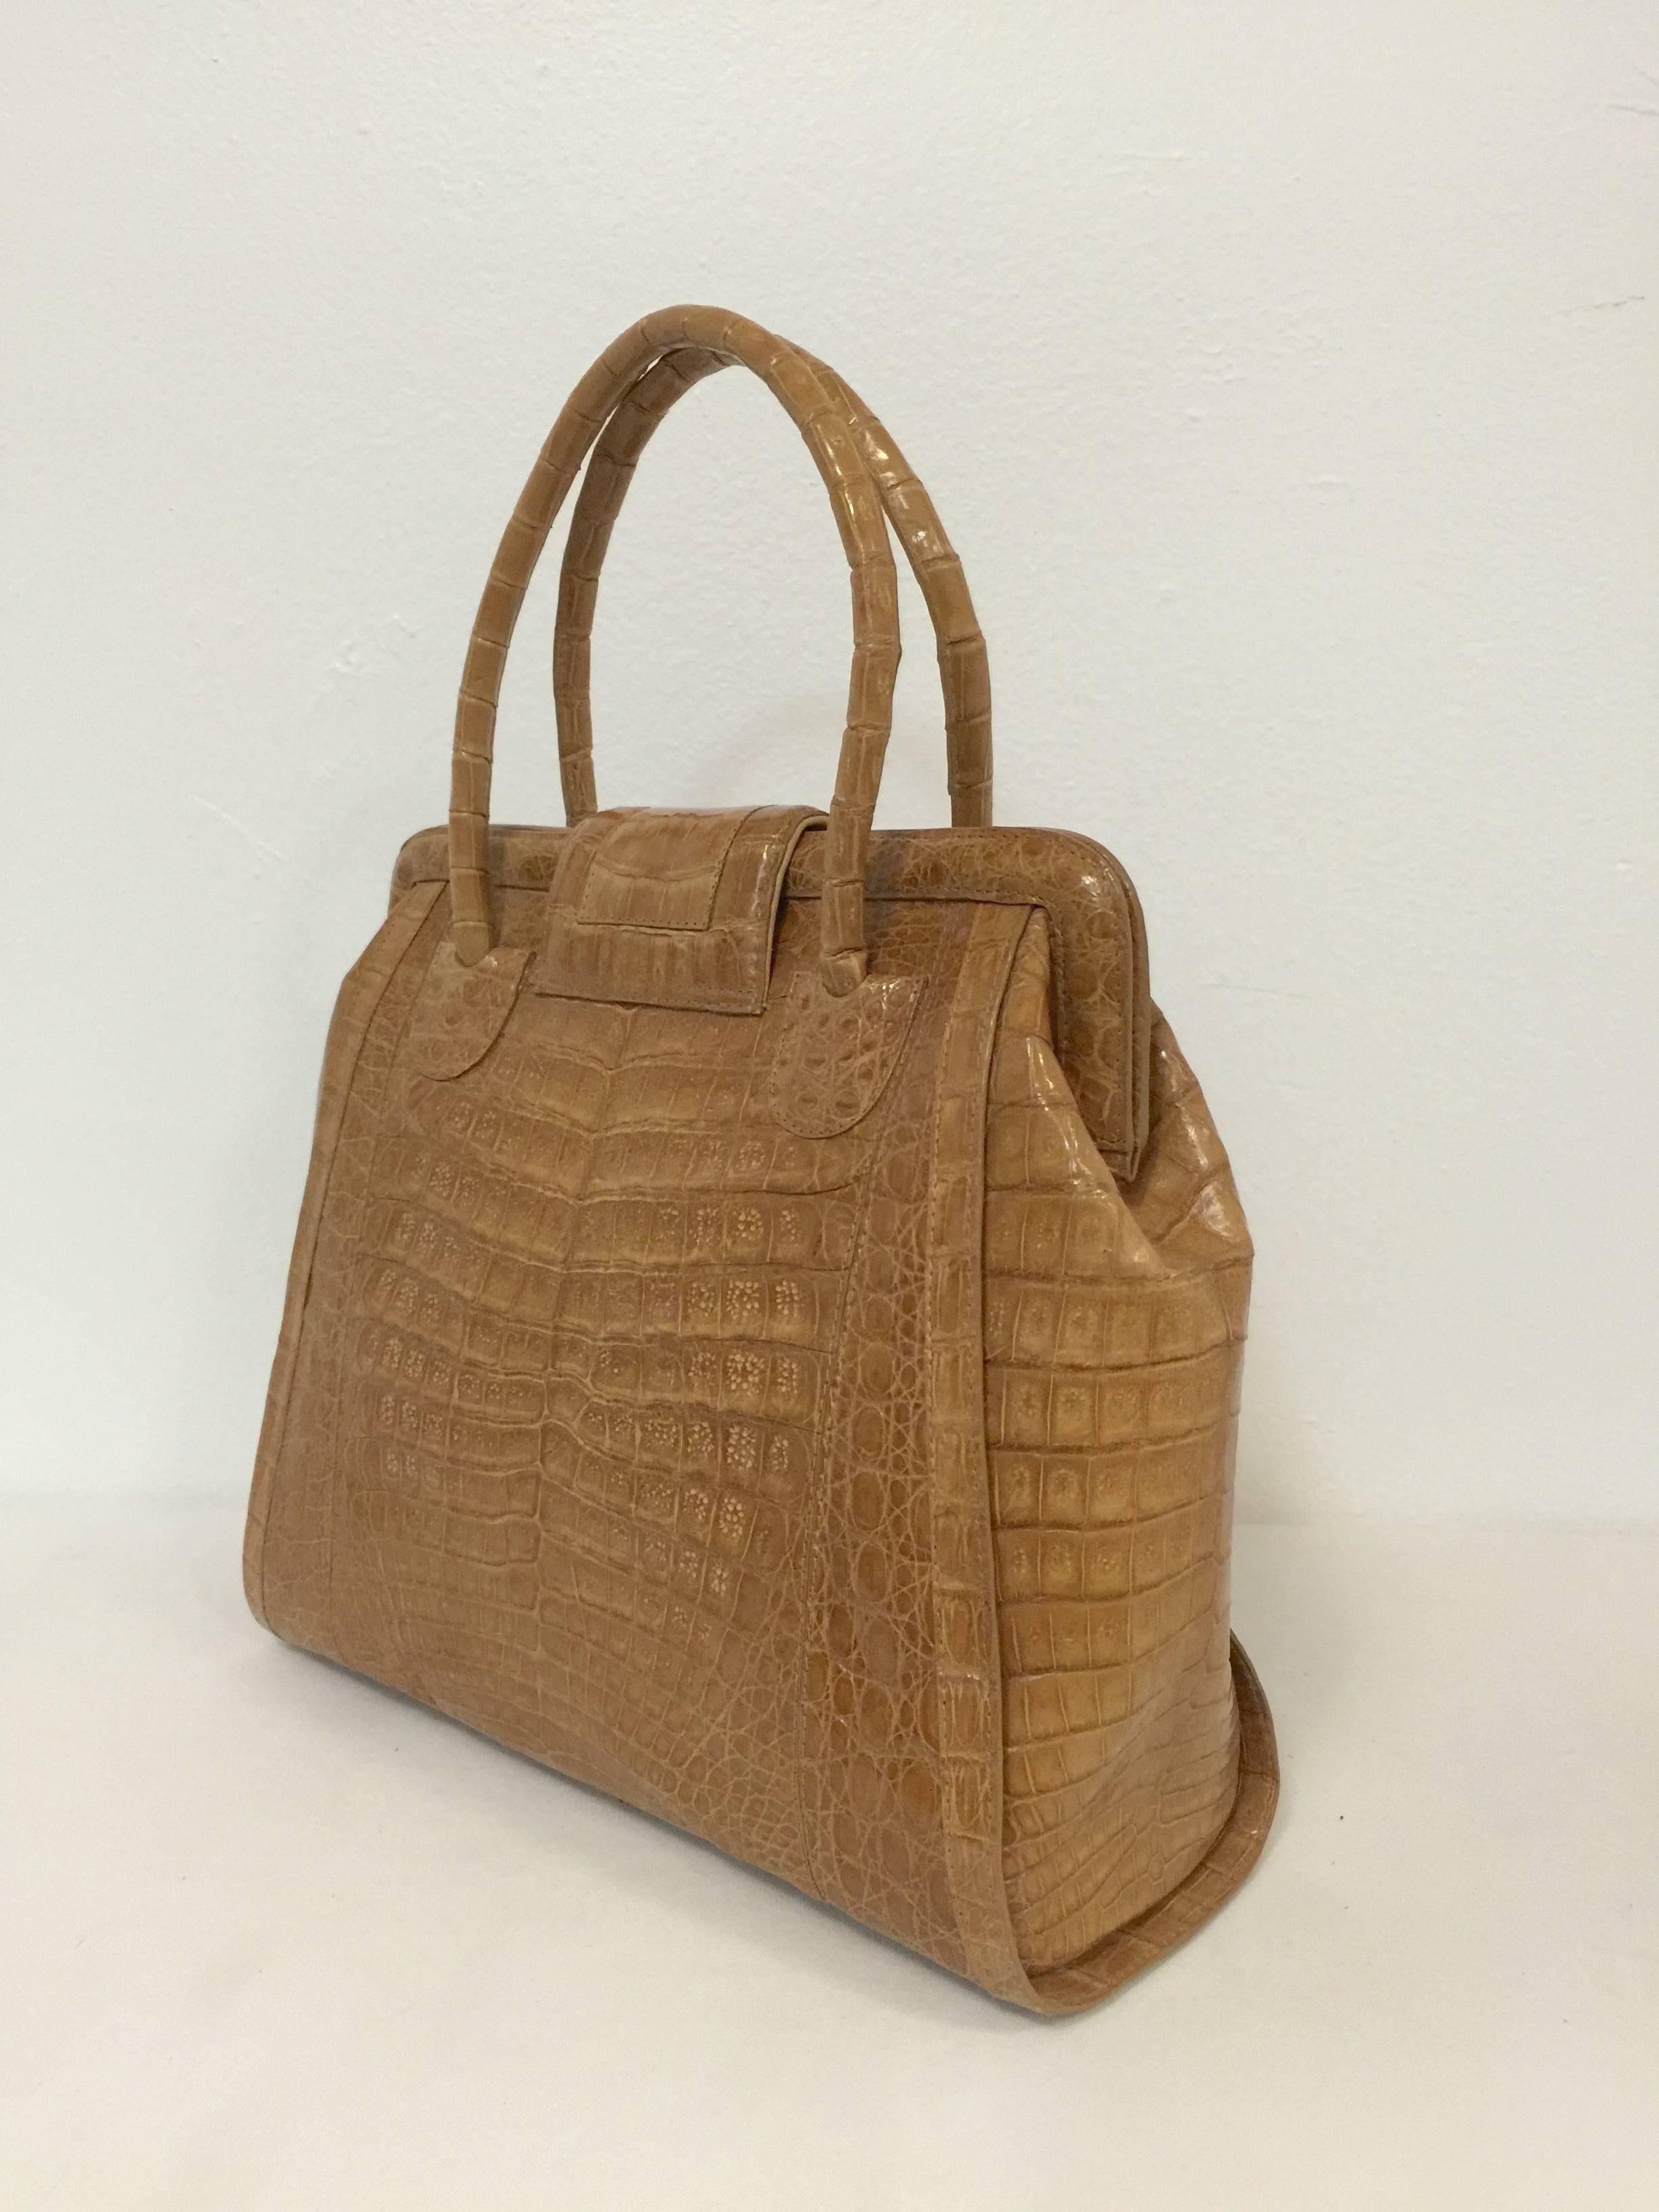 Nancy Gonzalez Crocodile Large Double Handle Bag is a must for all devotees of her designs! Crafted in Colombia, bag features ultra-luxurious crocodile in a soothing and neutral shade of caramel.  Magnetic frame closure reveals tan suede lining.